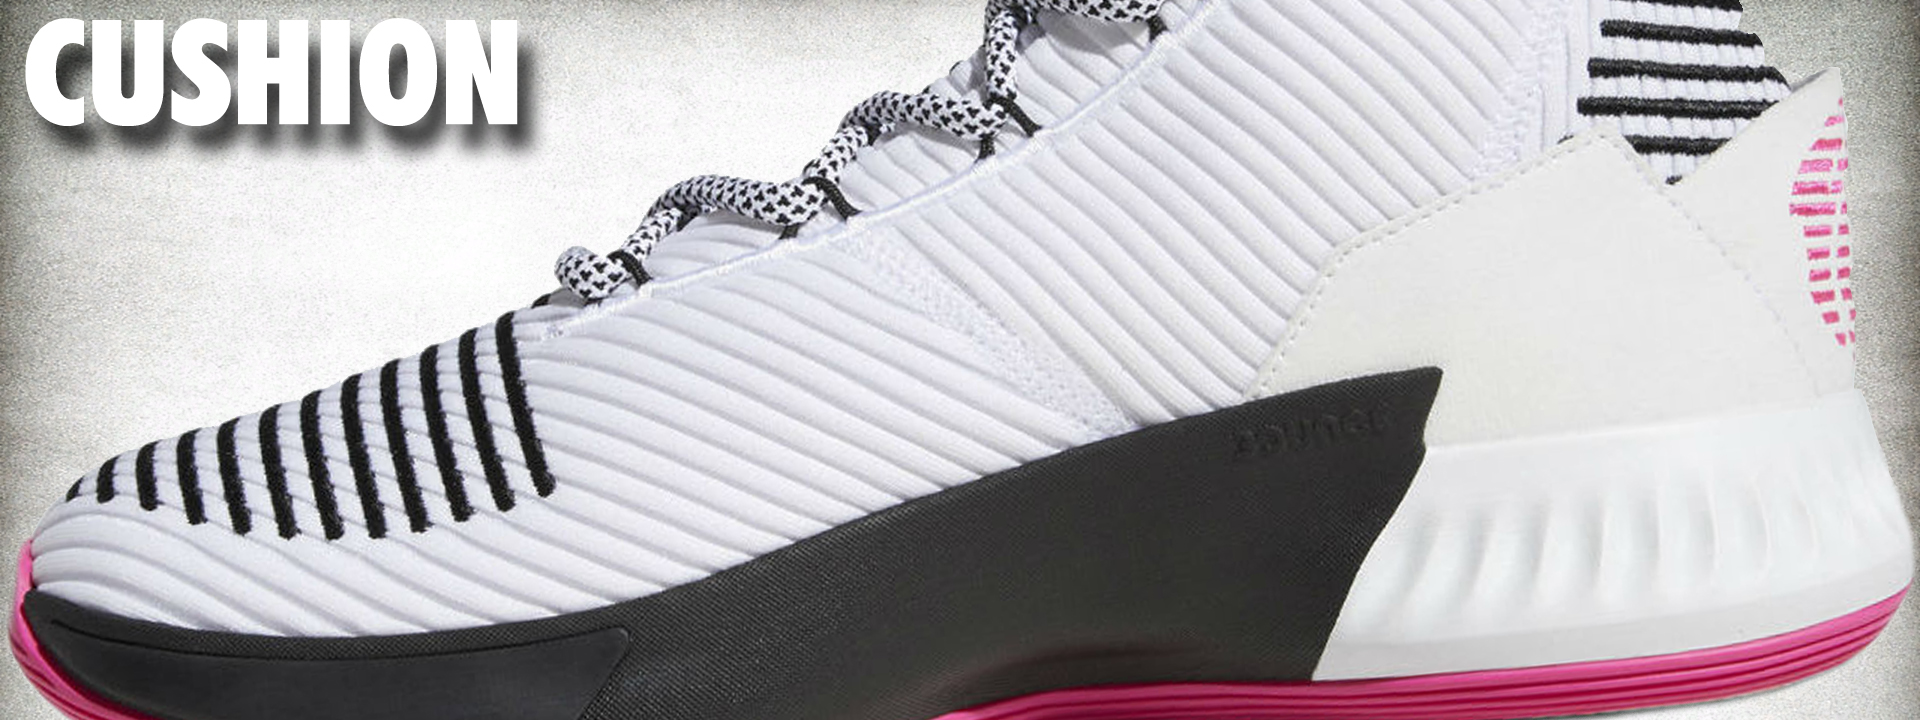 adidas Rose 9 Review | - WearTesters